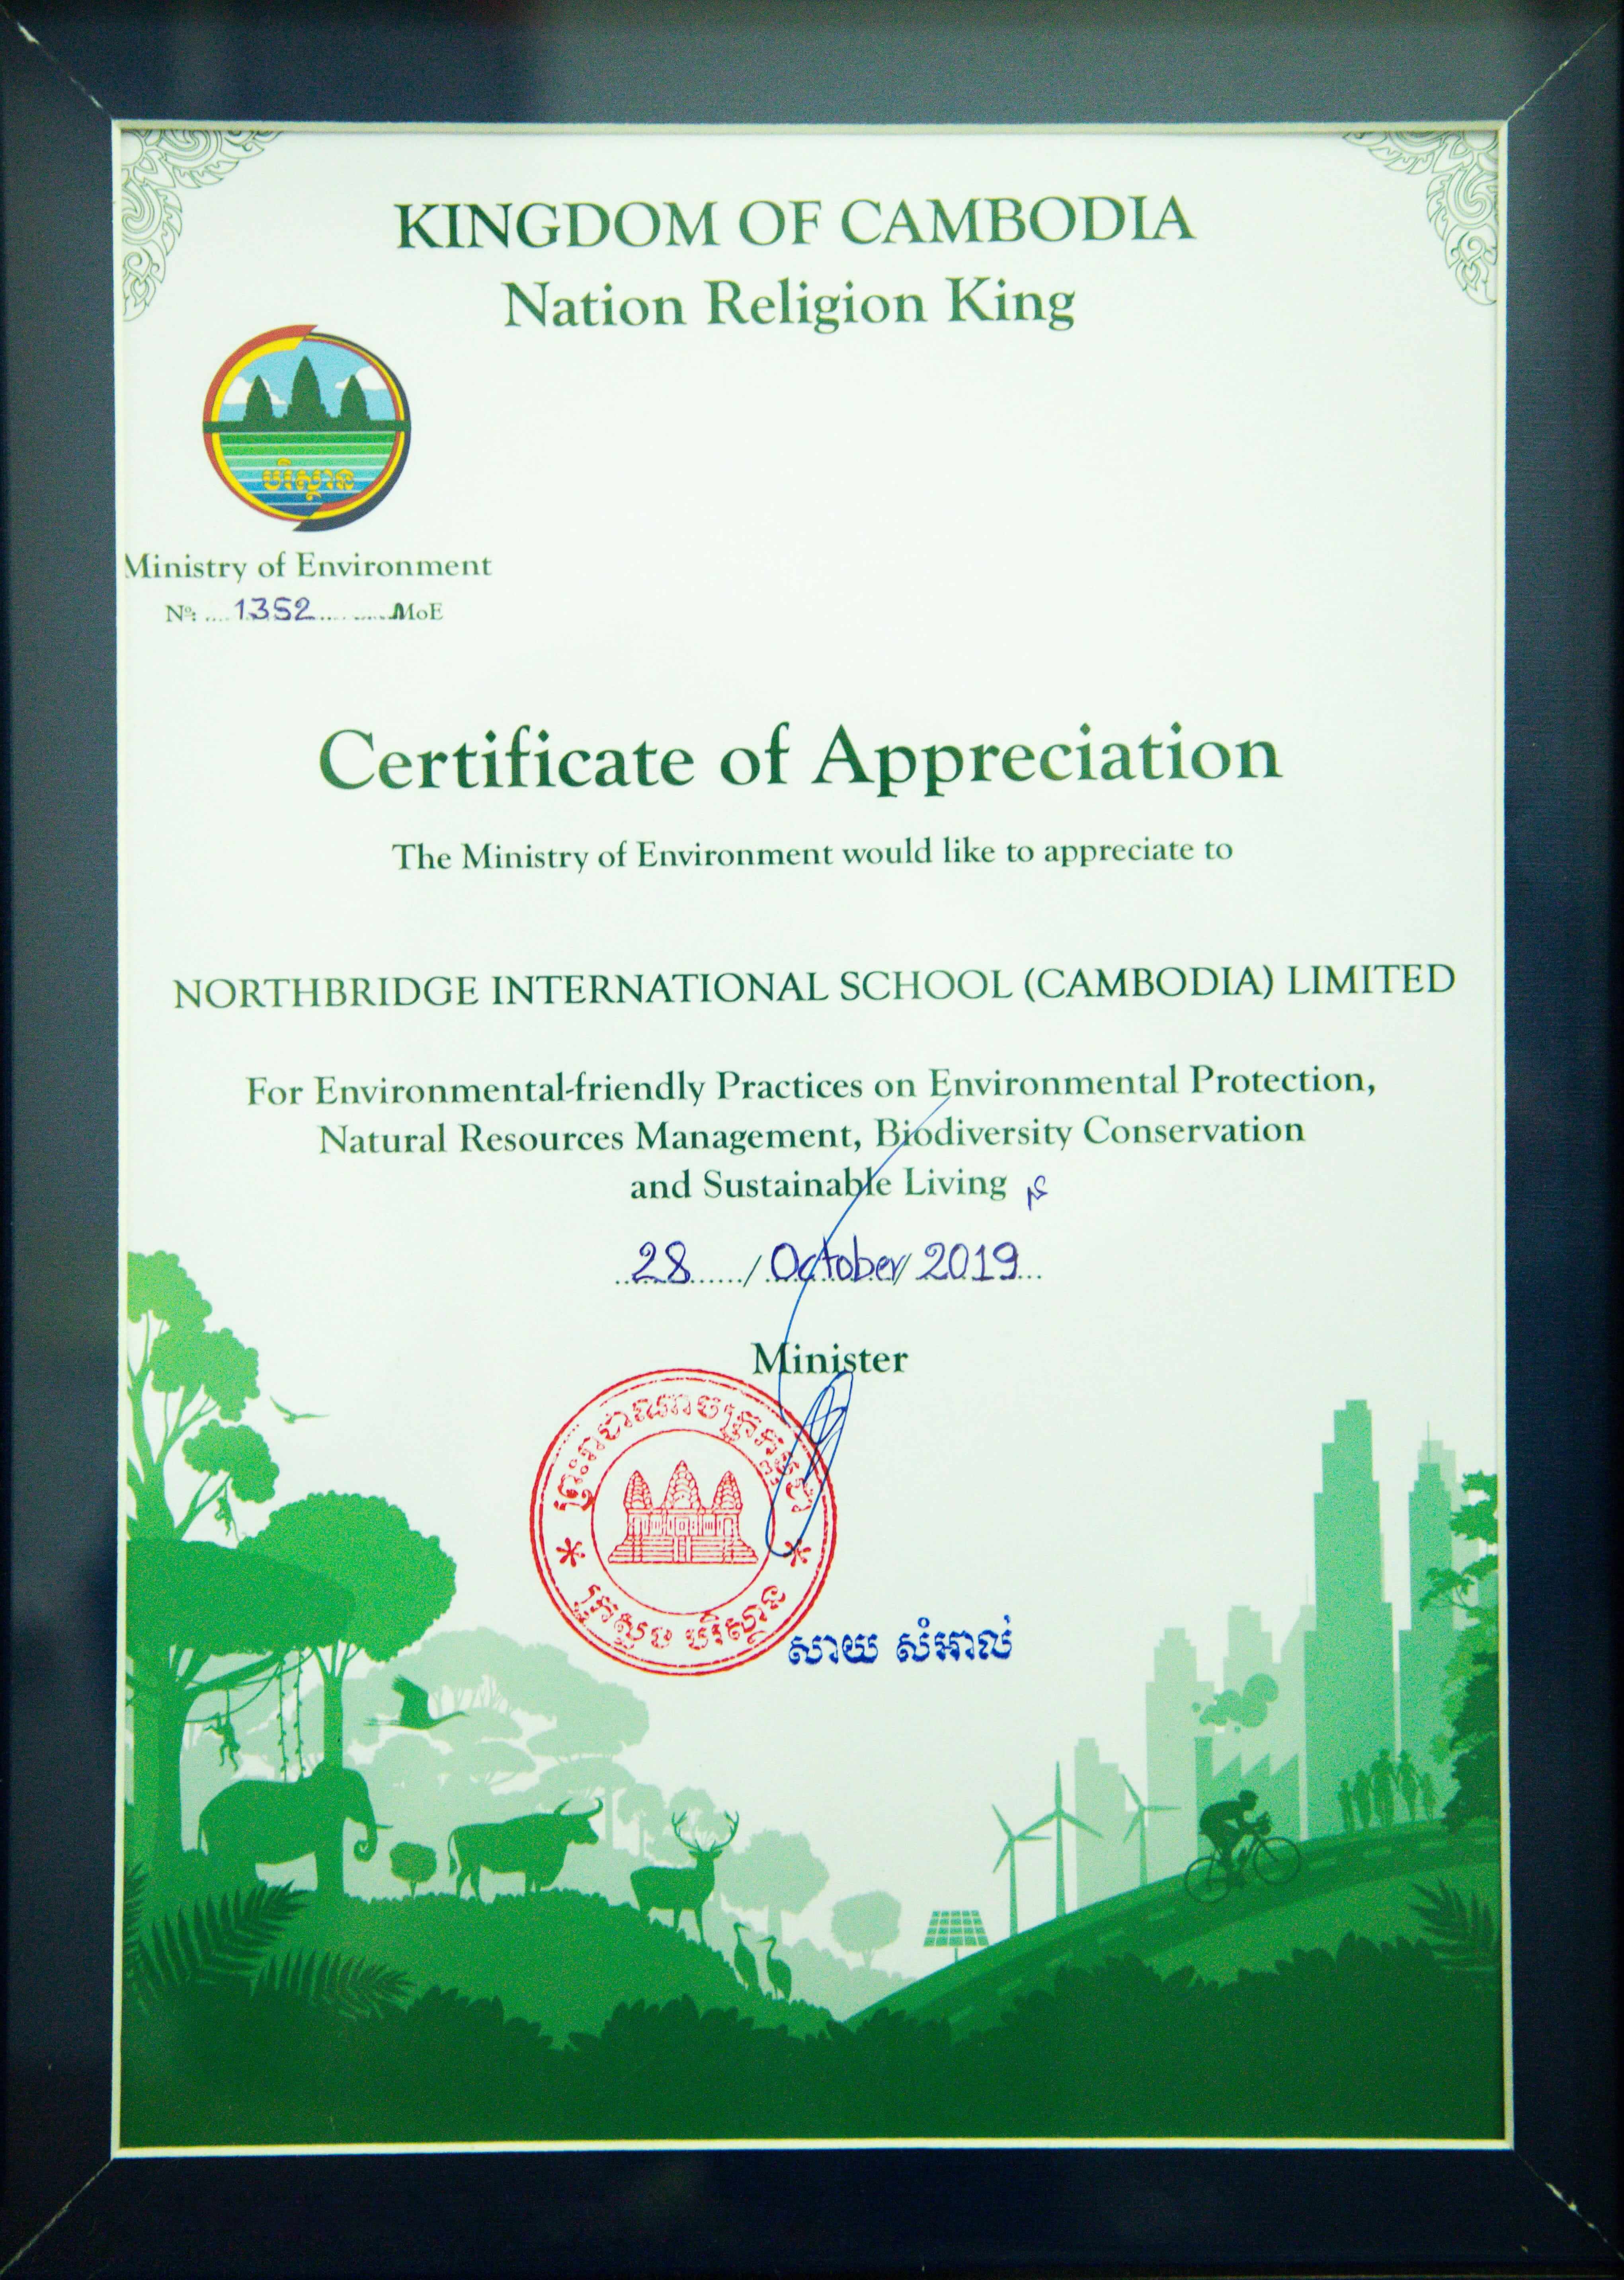 Ministry of Environment visit3010